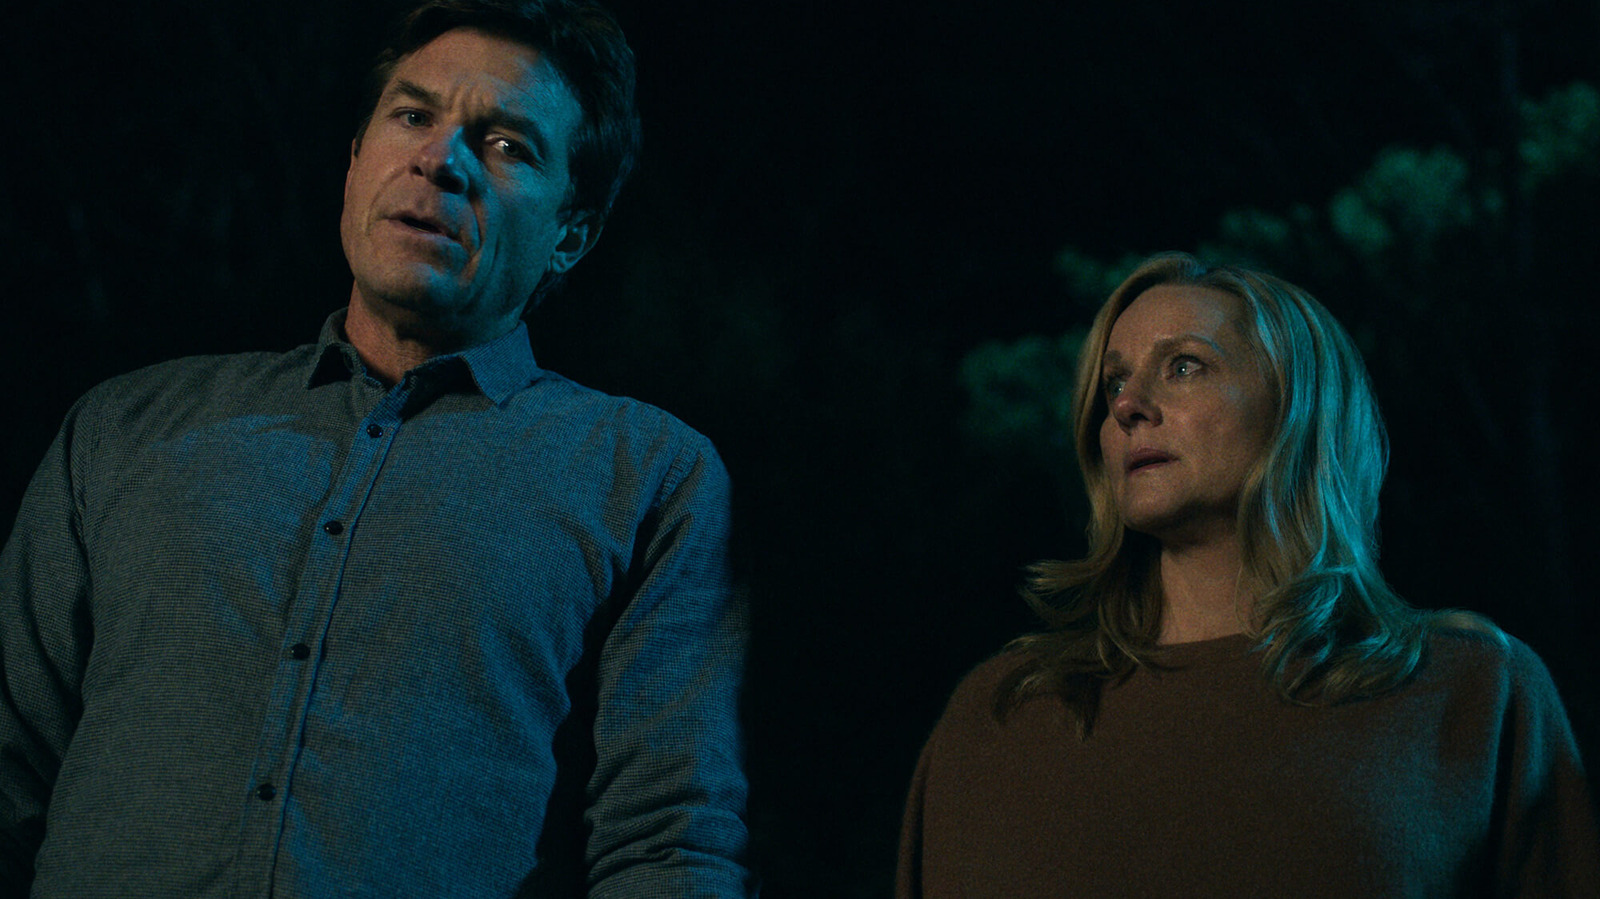 Ozark season four wrapping up sent set pieces from the show to